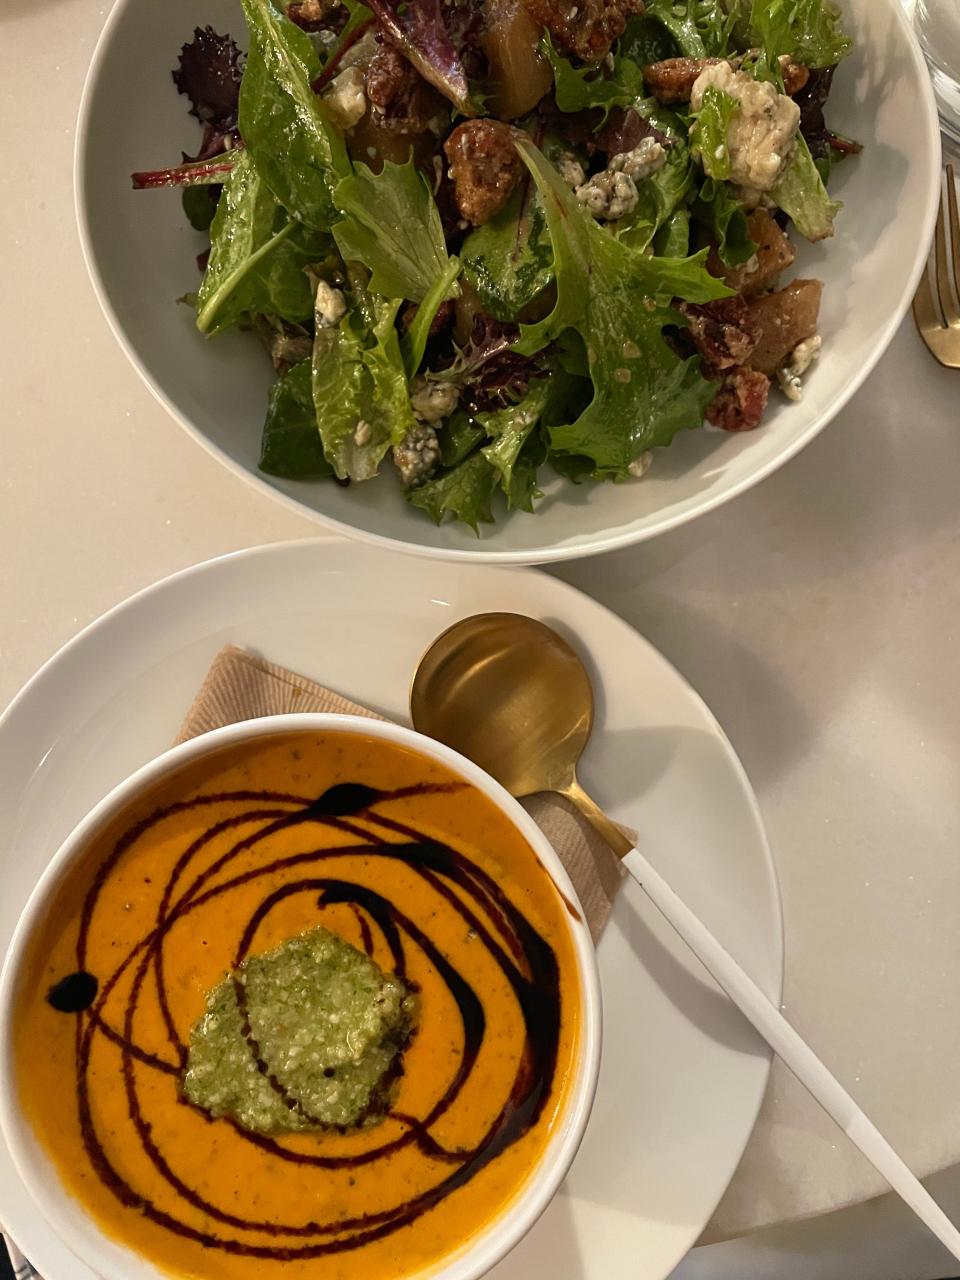 The roasted tomato bisque was topped with a dollop of pesto and a balsamic drizzle, and the mixed greens salad featured roasted peaches, candied pecans, gorgonzola and honey basil dressing.